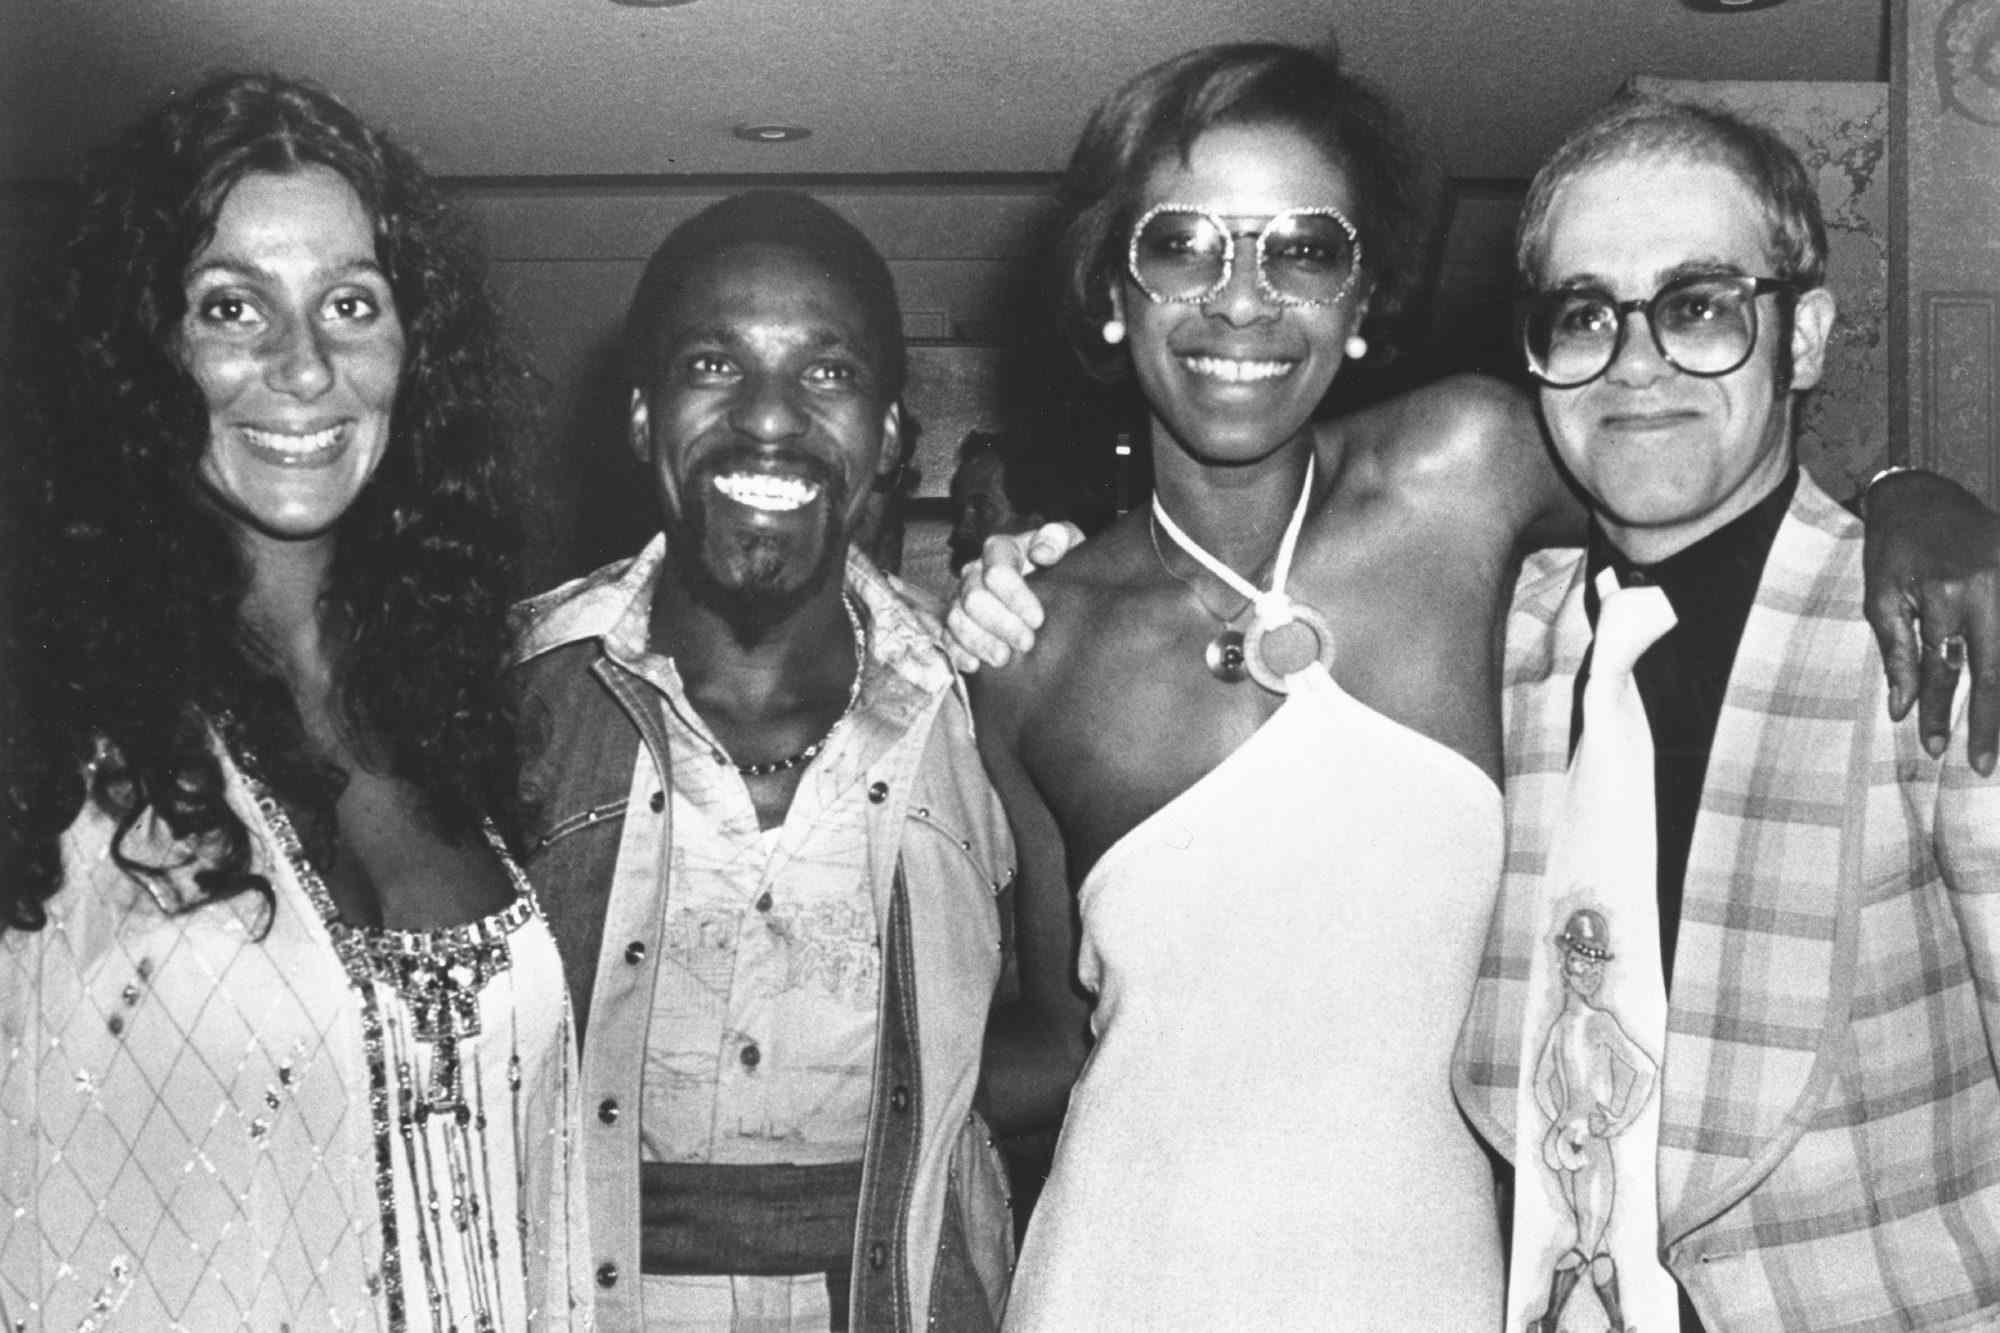 Pop singer Elton John poses for a portrait with with fellow popular singers Cher (left), Al Wilson and Natalie Cole at a Wings concert at the Forum in June 1976 in Inglewood, CA